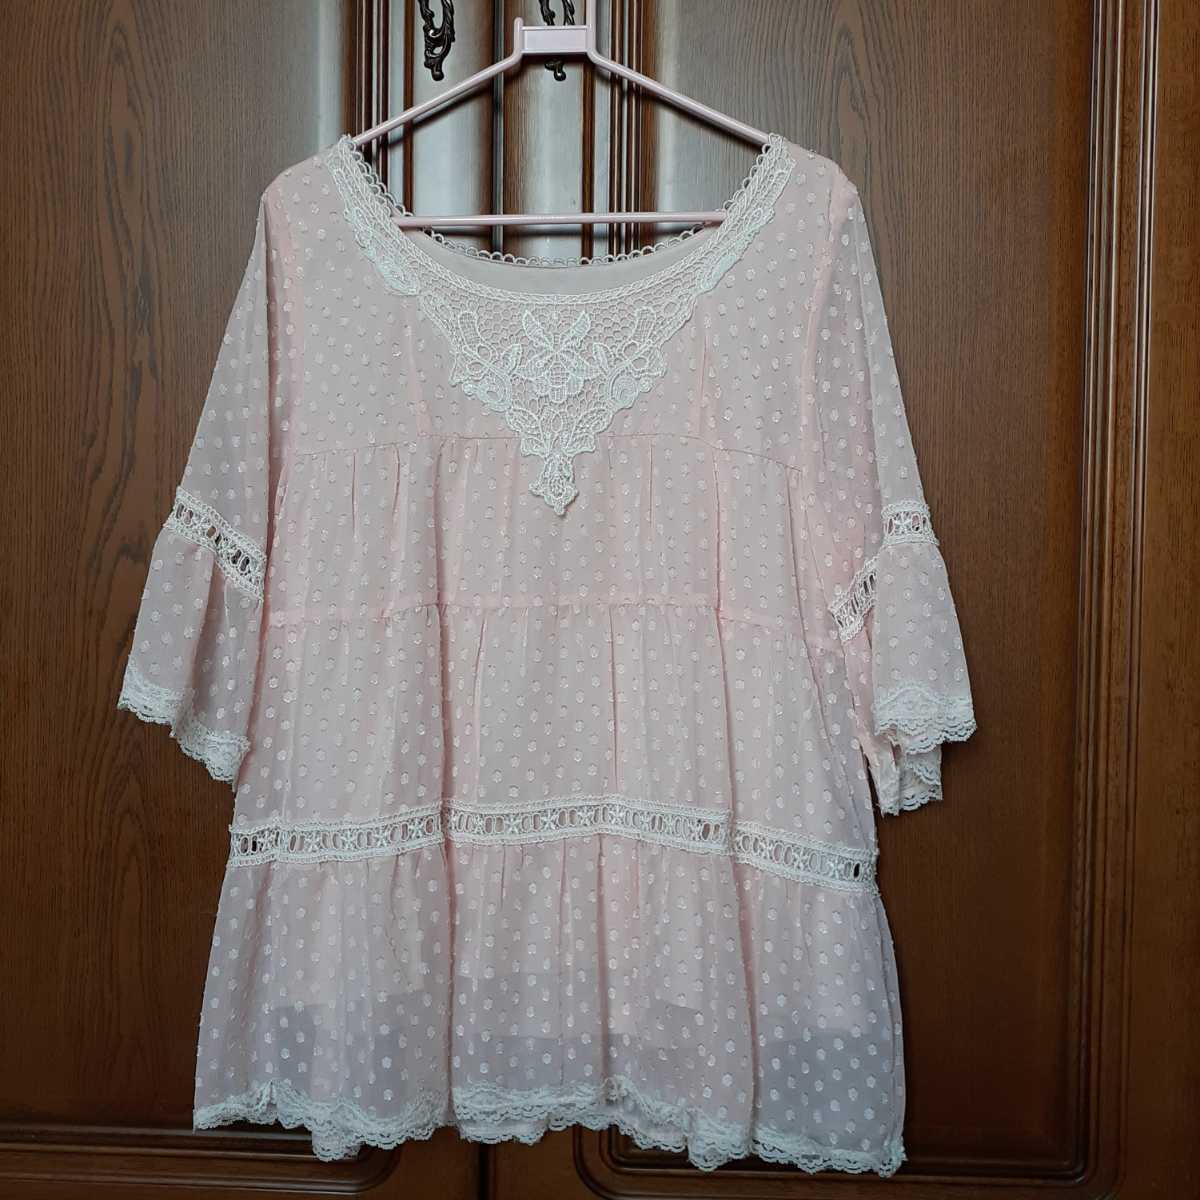 Jour Ferie Jules Ferrie e every day beautiful! at any time beautifully ... tunic candy pink QVC pull over tops 